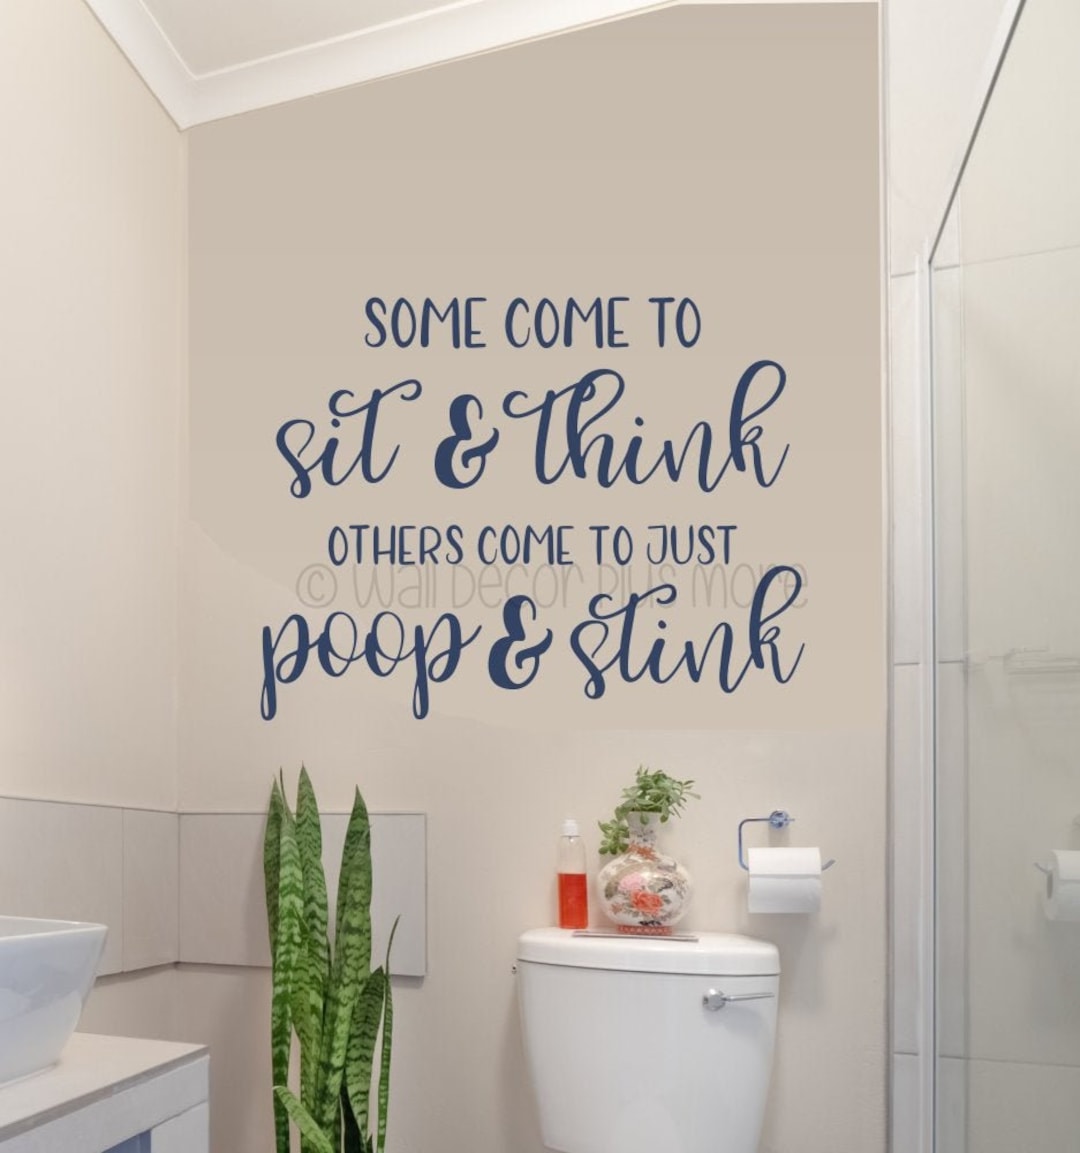 Toilet Sticker Mural French, Sticker Wall Quote Toilet